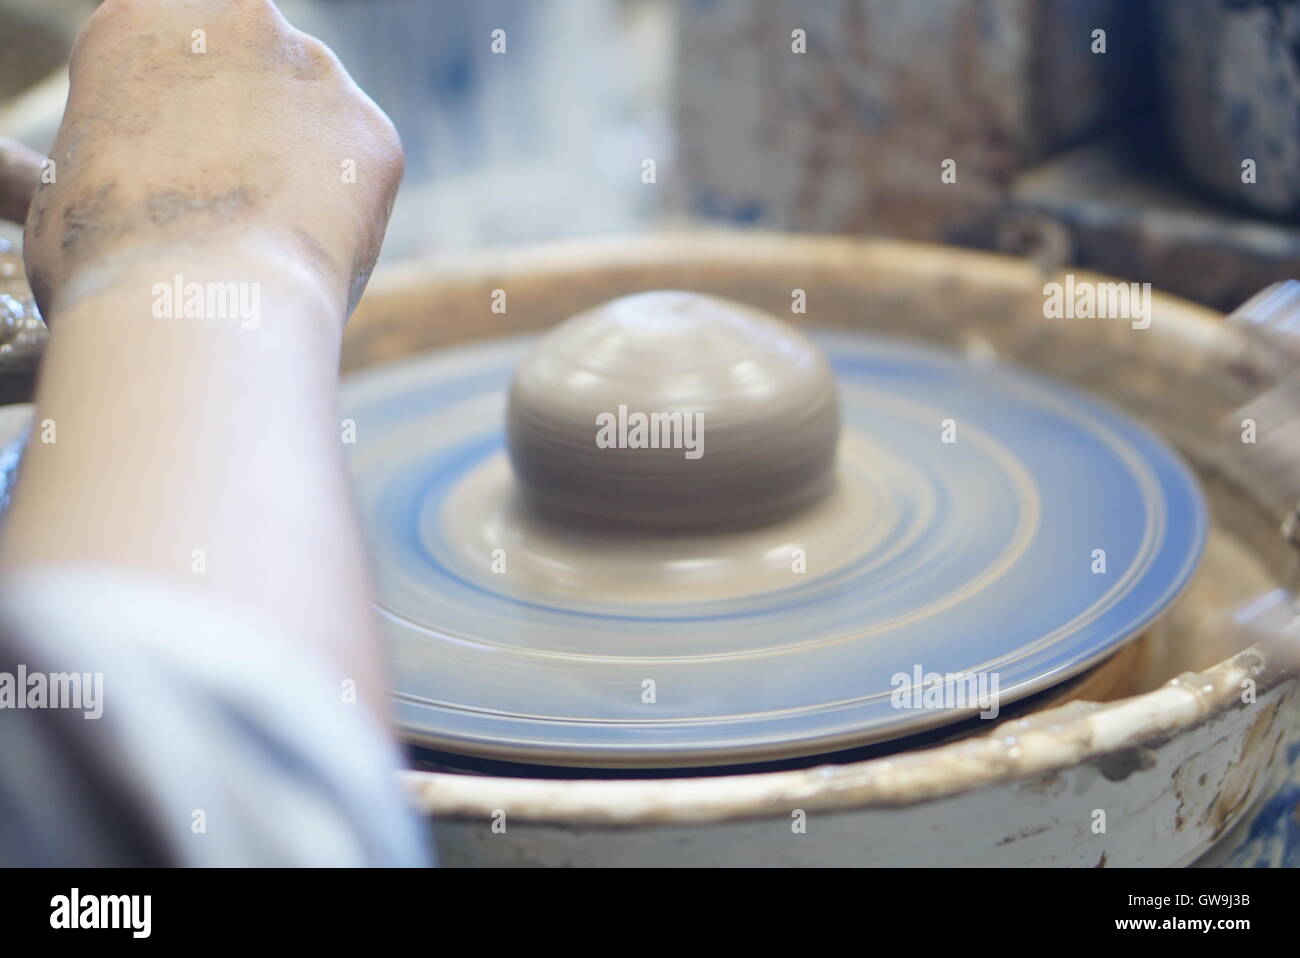 A pottery class, taken as pot is being thrown Stock Photo